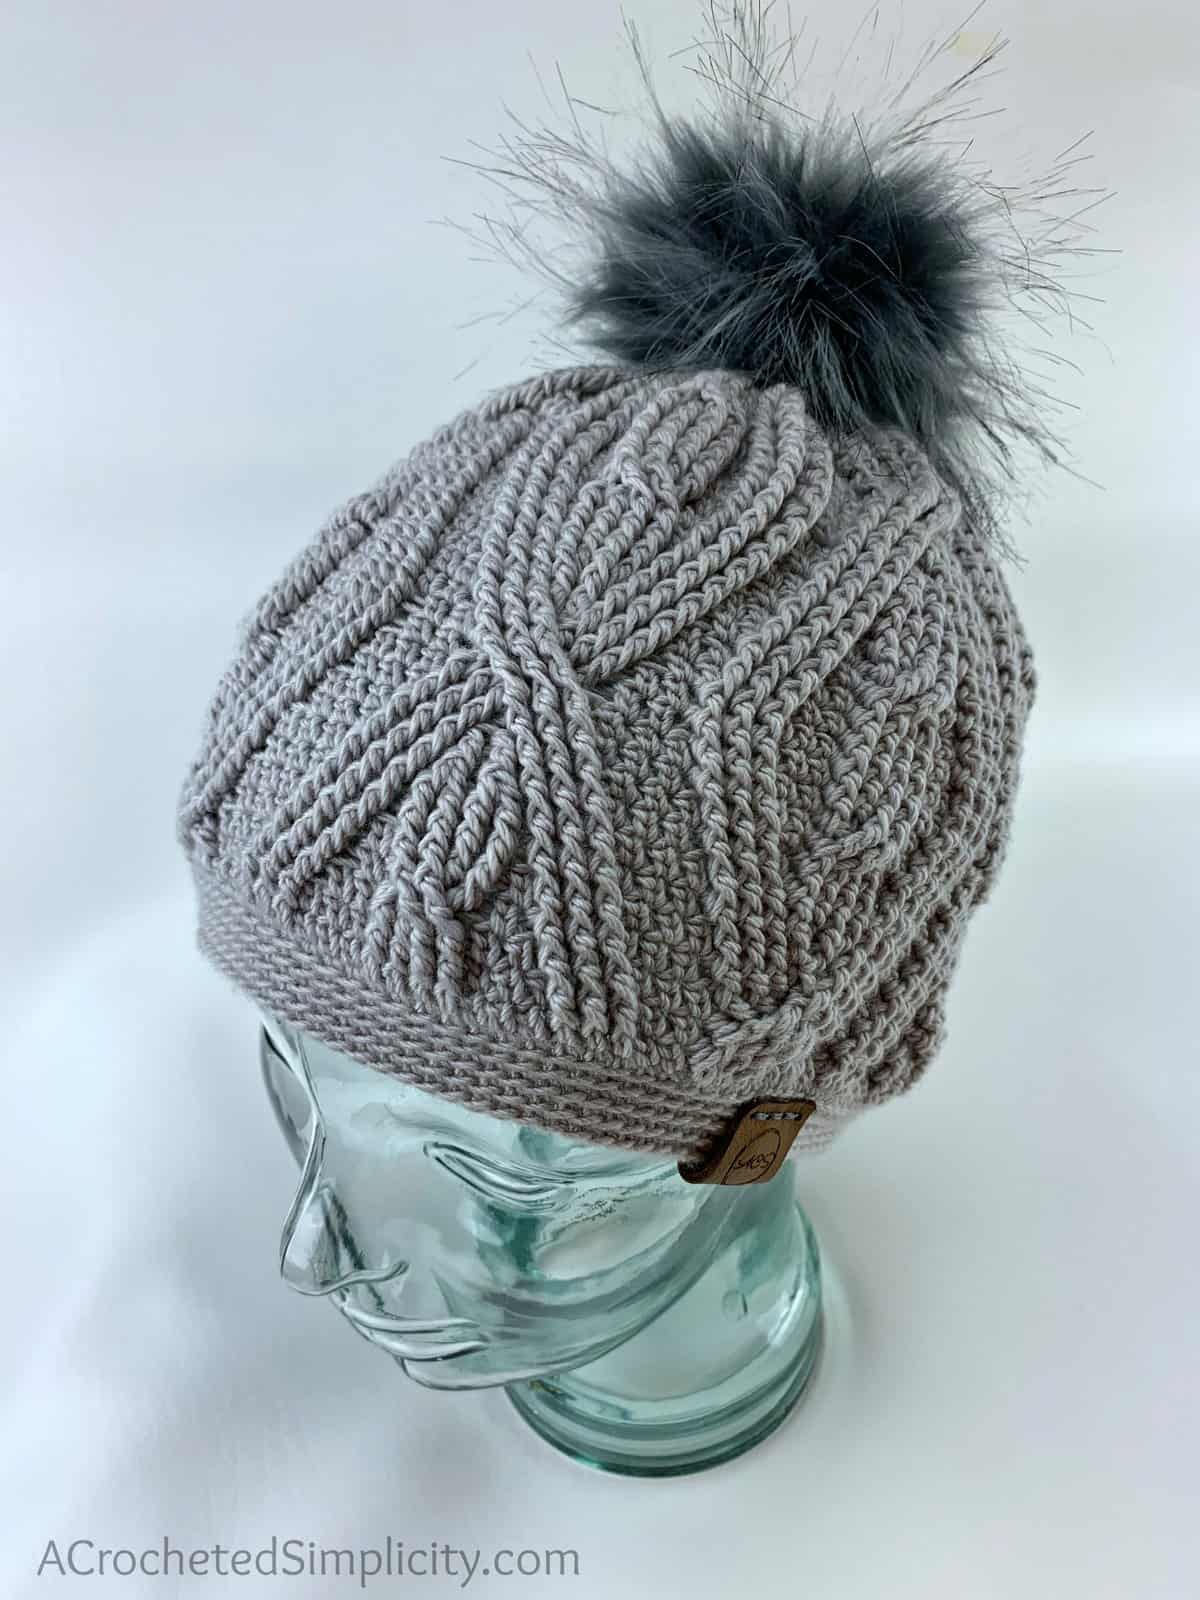 Free Crochet Pattern - Diamonds & Twists Cabled Beanie by A Crocheted Simplicity #freecrochetpattern #cabledbeanie #crochetcables #crochetcablepattern #crochetbeaniepattern #crochethatpattern #cabledhatpattern #crochet